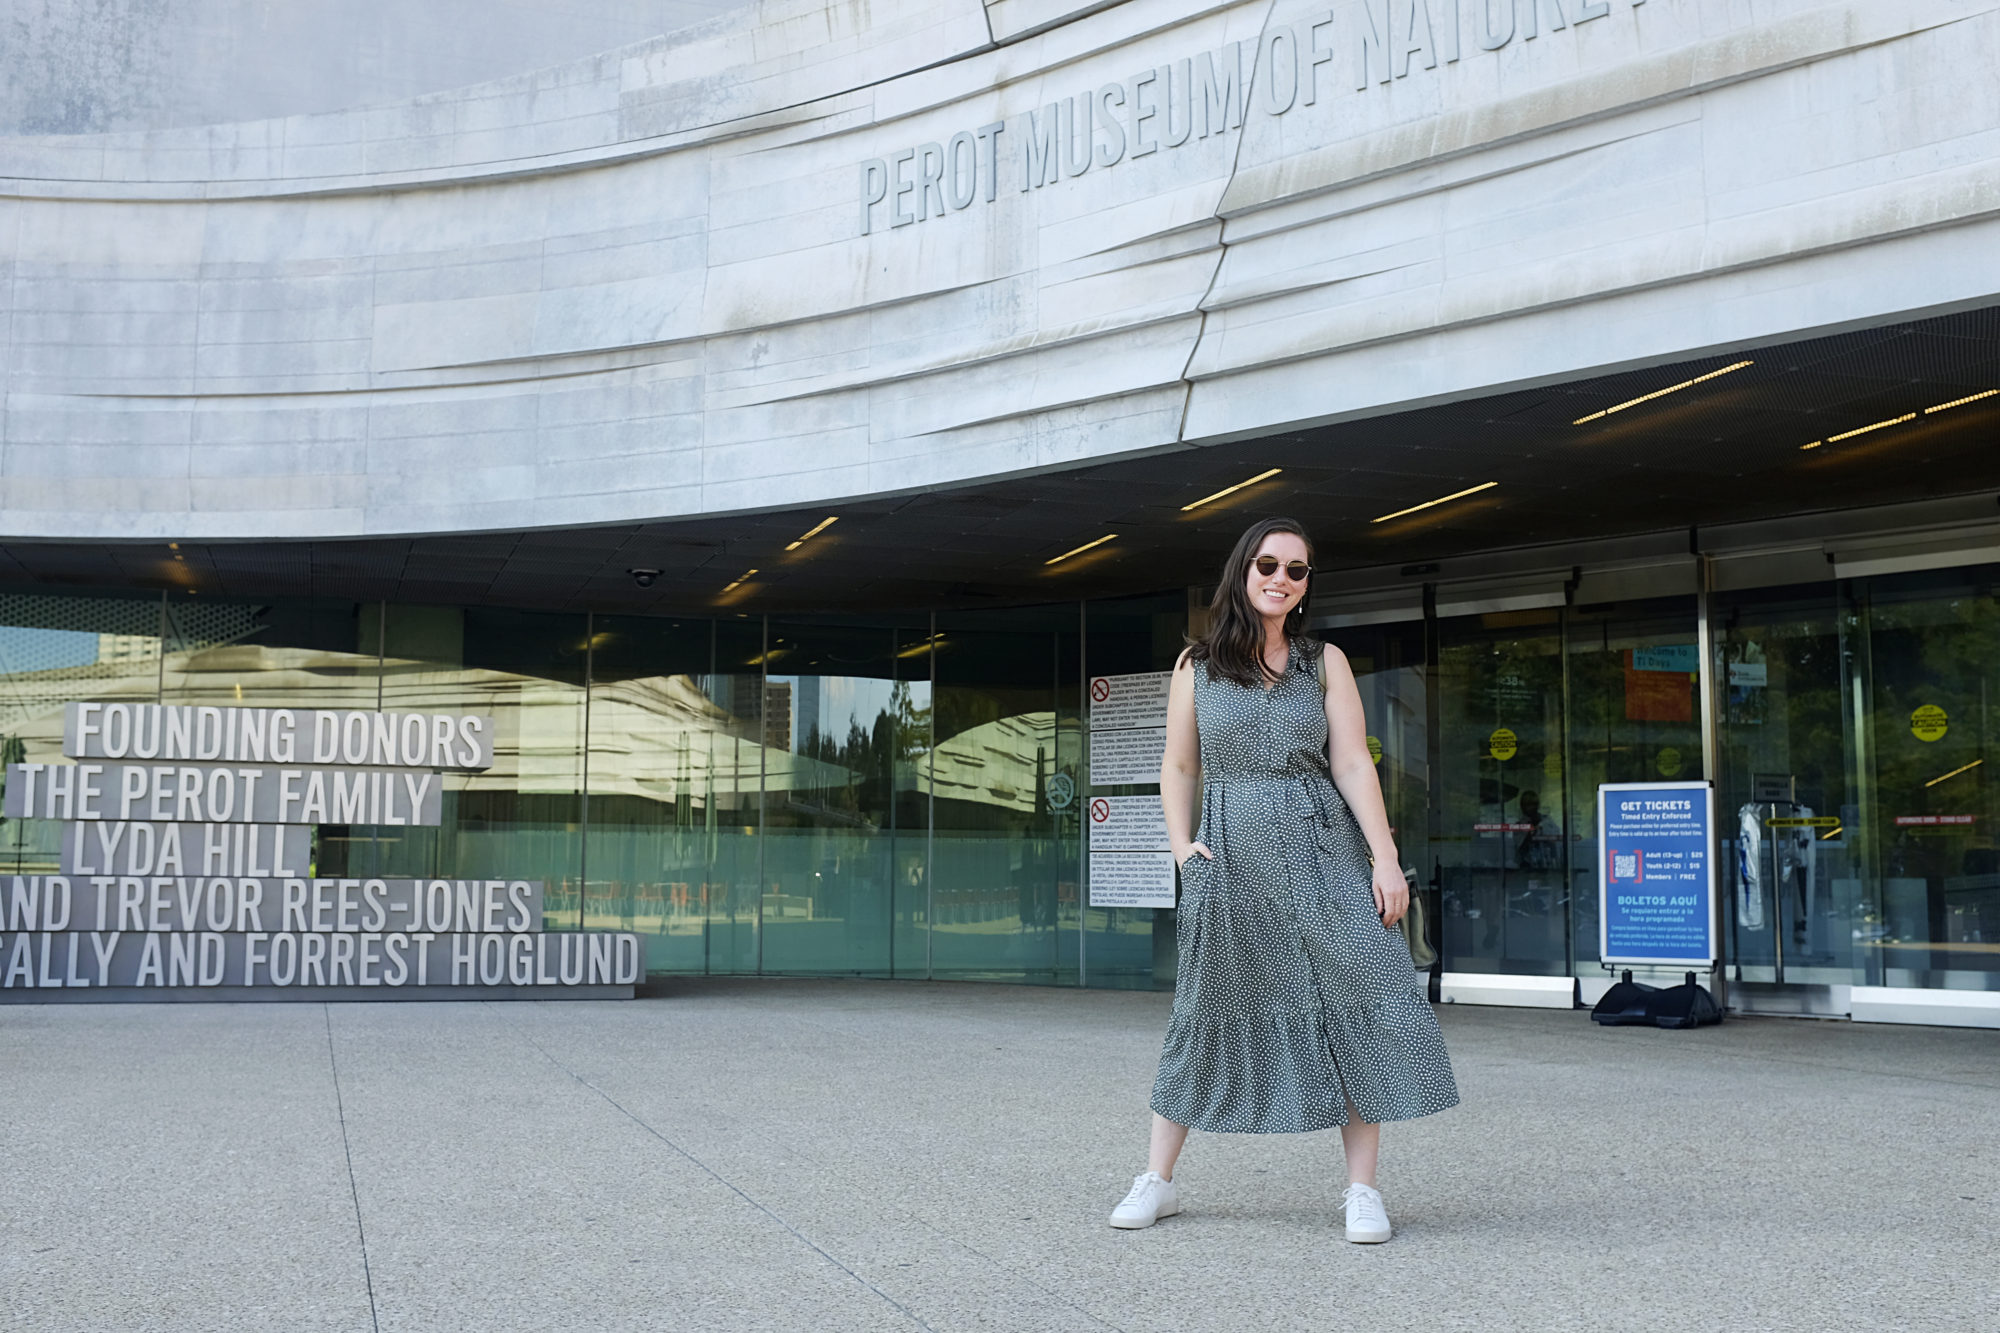 Alyssa stands outside of the Perot Museum